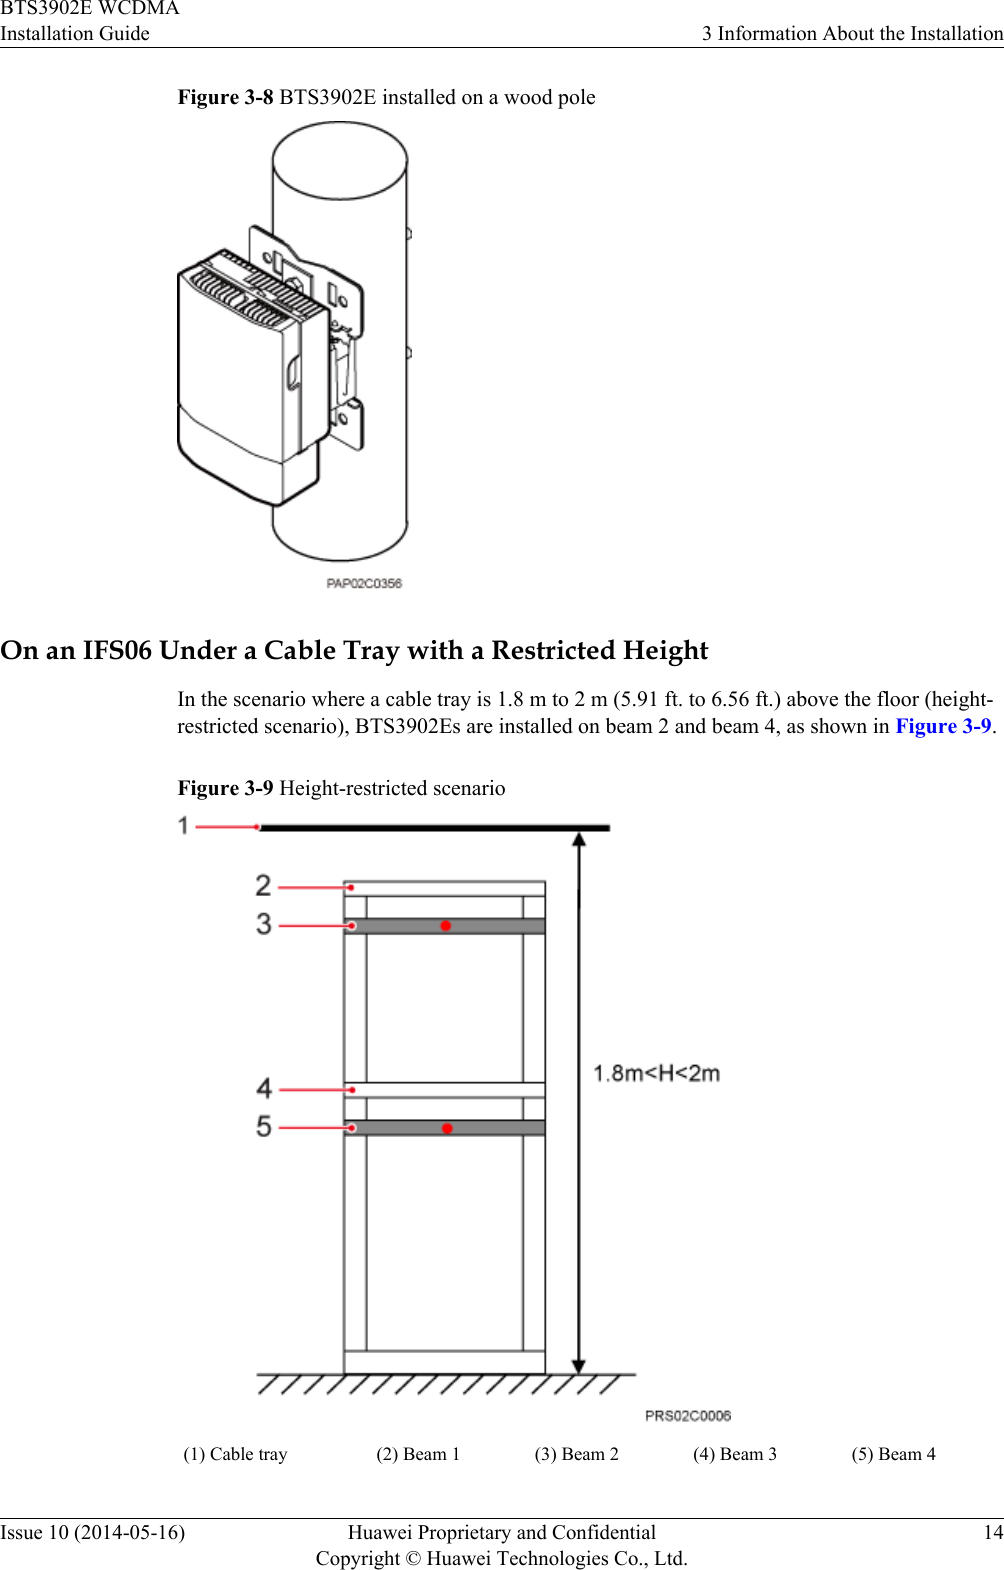 Figure 3-8 BTS3902E installed on a wood poleOn an IFS06 Under a Cable Tray with a Restricted HeightIn the scenario where a cable tray is 1.8 m to 2 m (5.91 ft. to 6.56 ft.) above the floor (height-restricted scenario), BTS3902Es are installed on beam 2 and beam 4, as shown in Figure 3-9.Figure 3-9 Height-restricted scenario(1) Cable tray (2) Beam 1 (3) Beam 2 (4) Beam 3 (5) Beam 4BTS3902E WCDMAInstallation Guide 3 Information About the InstallationIssue 10 (2014-05-16) Huawei Proprietary and ConfidentialCopyright © Huawei Technologies Co., Ltd.14